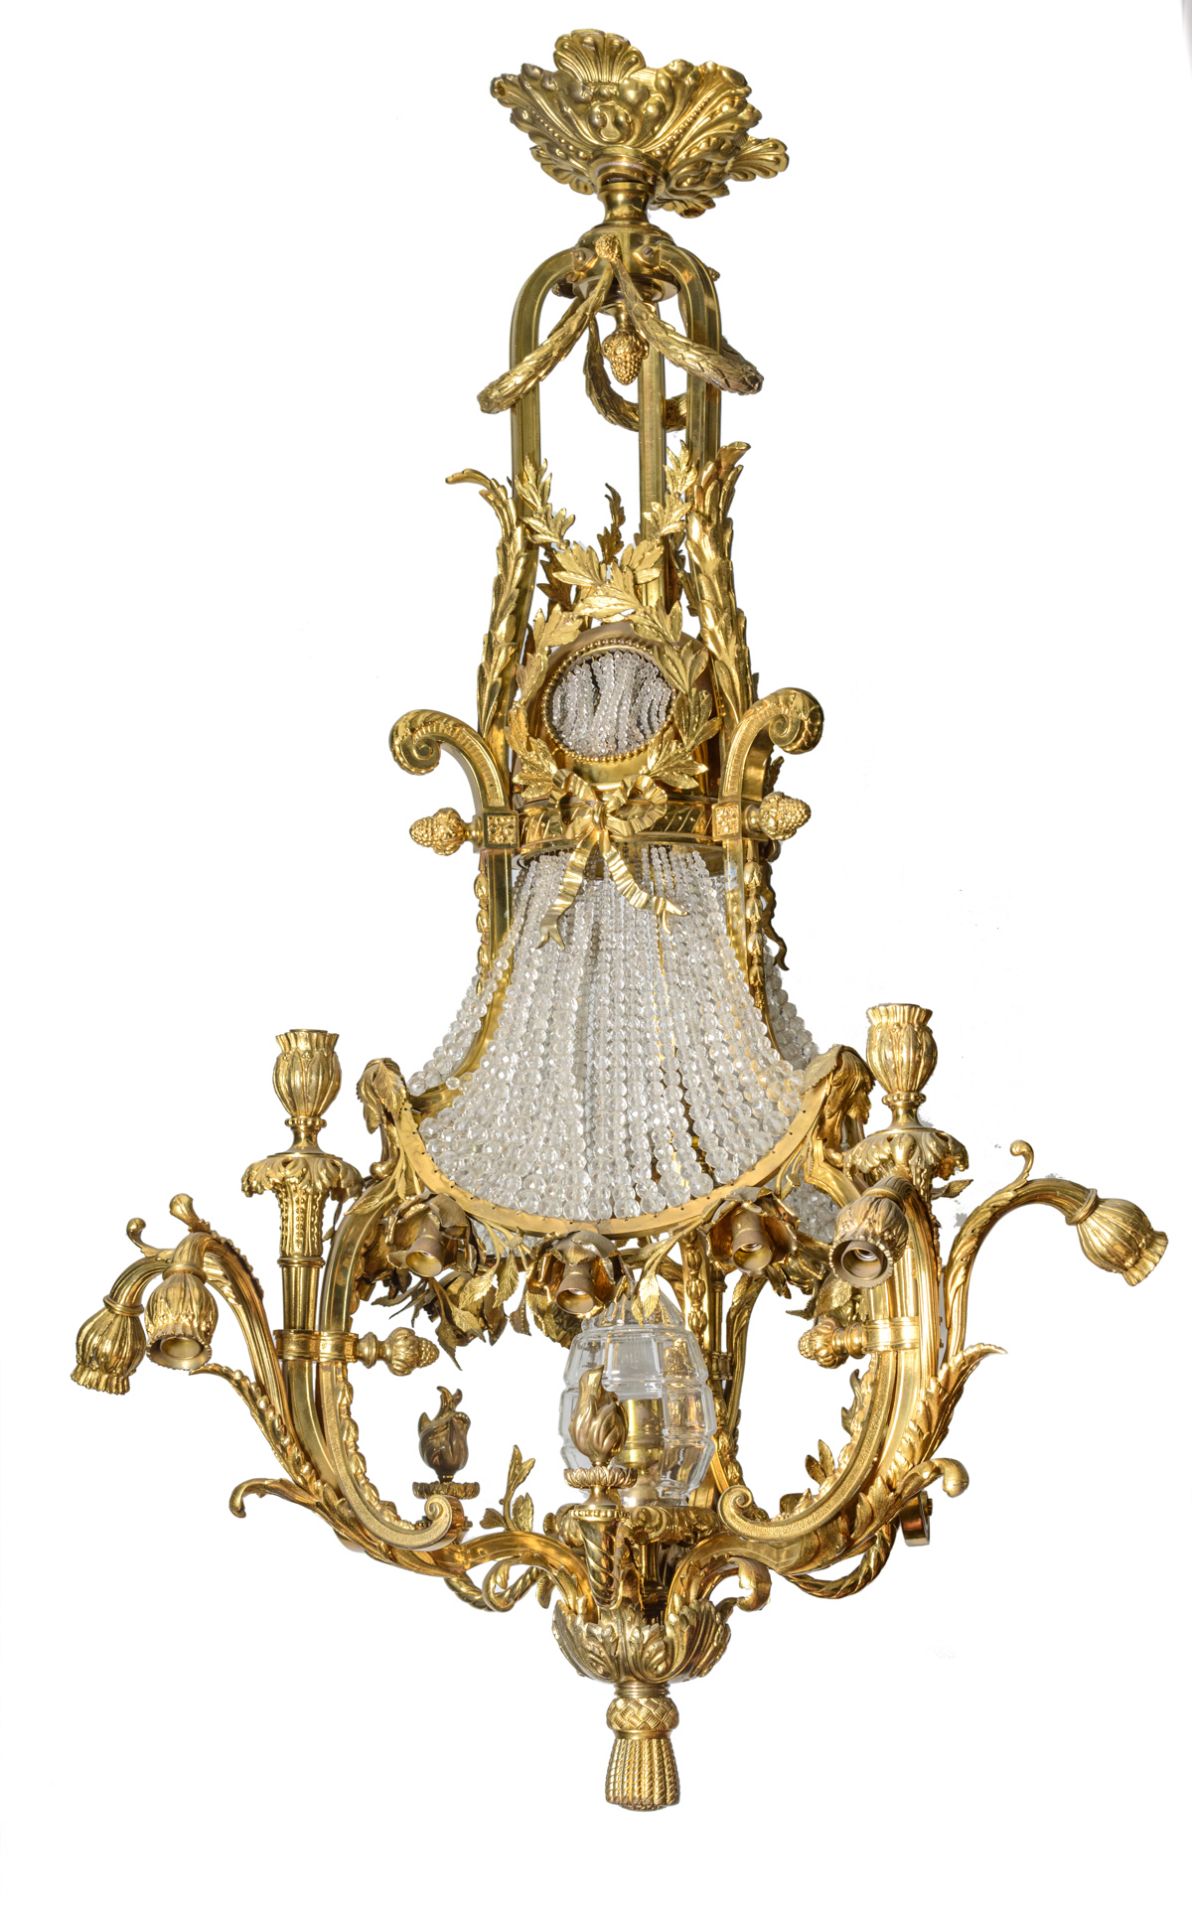 An imposing Neoclassical gilt bronze chandelier, the central glass bowl overarched by cut glass pear